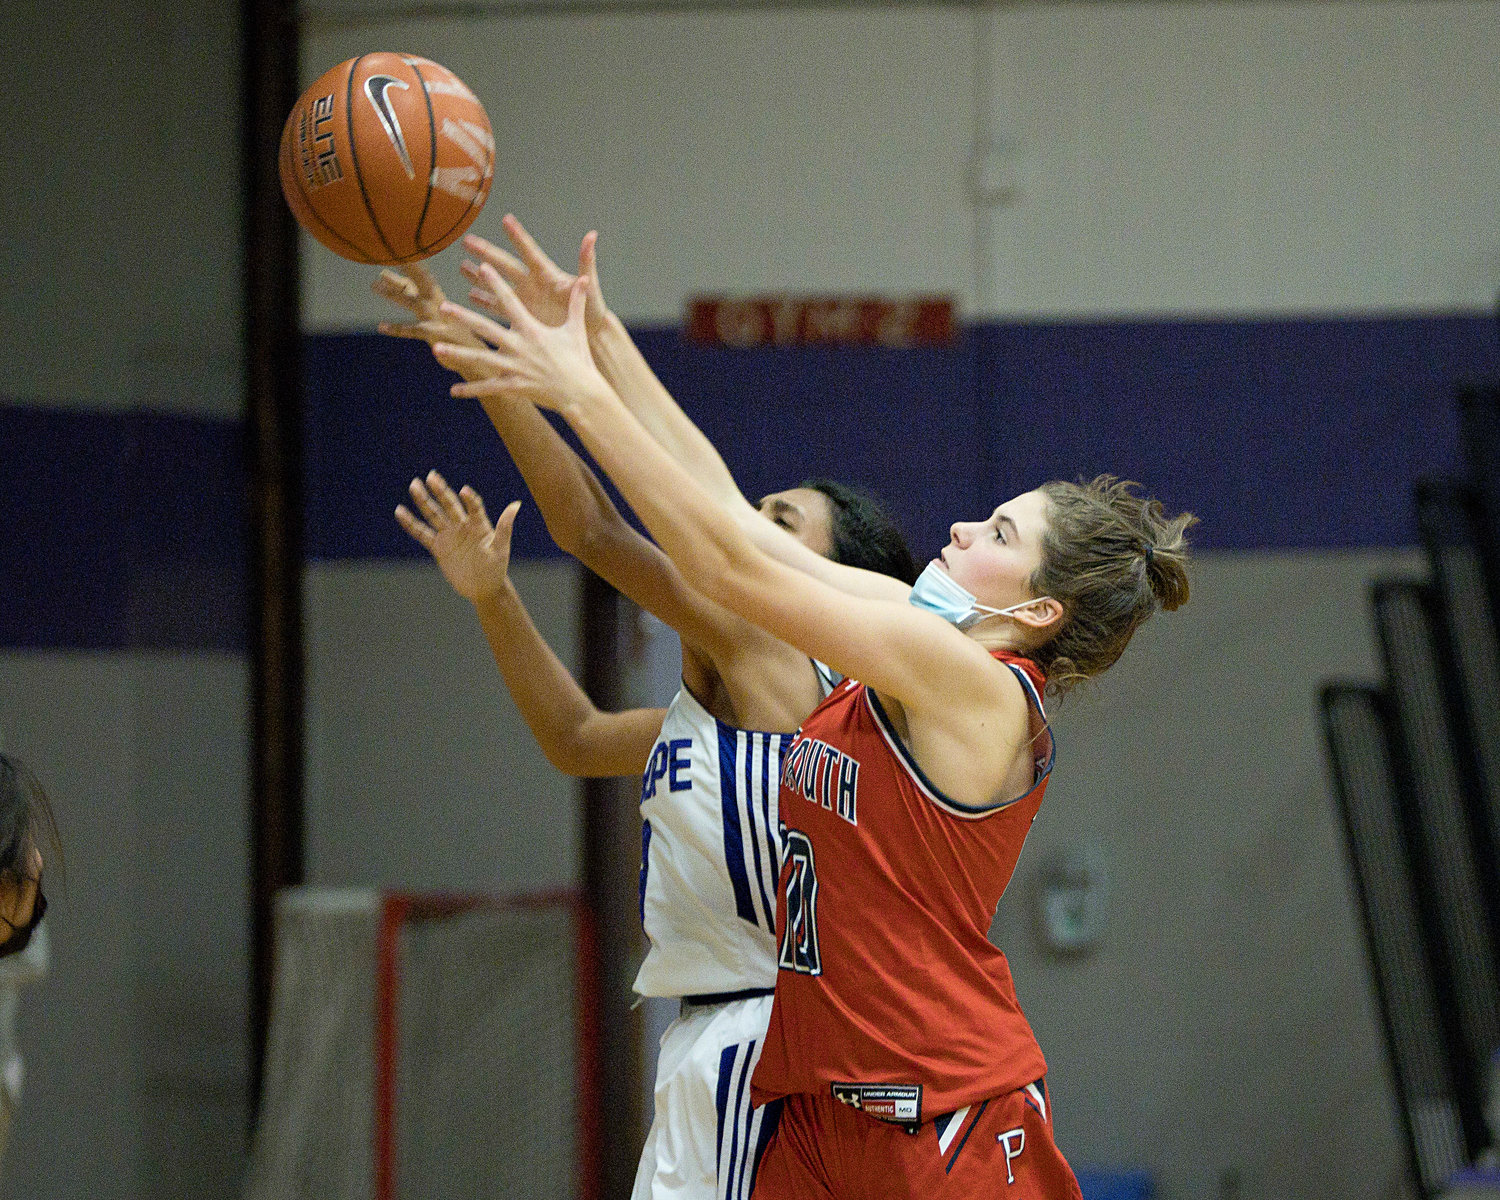 Kaitlin Roche snags a rebound against Mt. Hope.